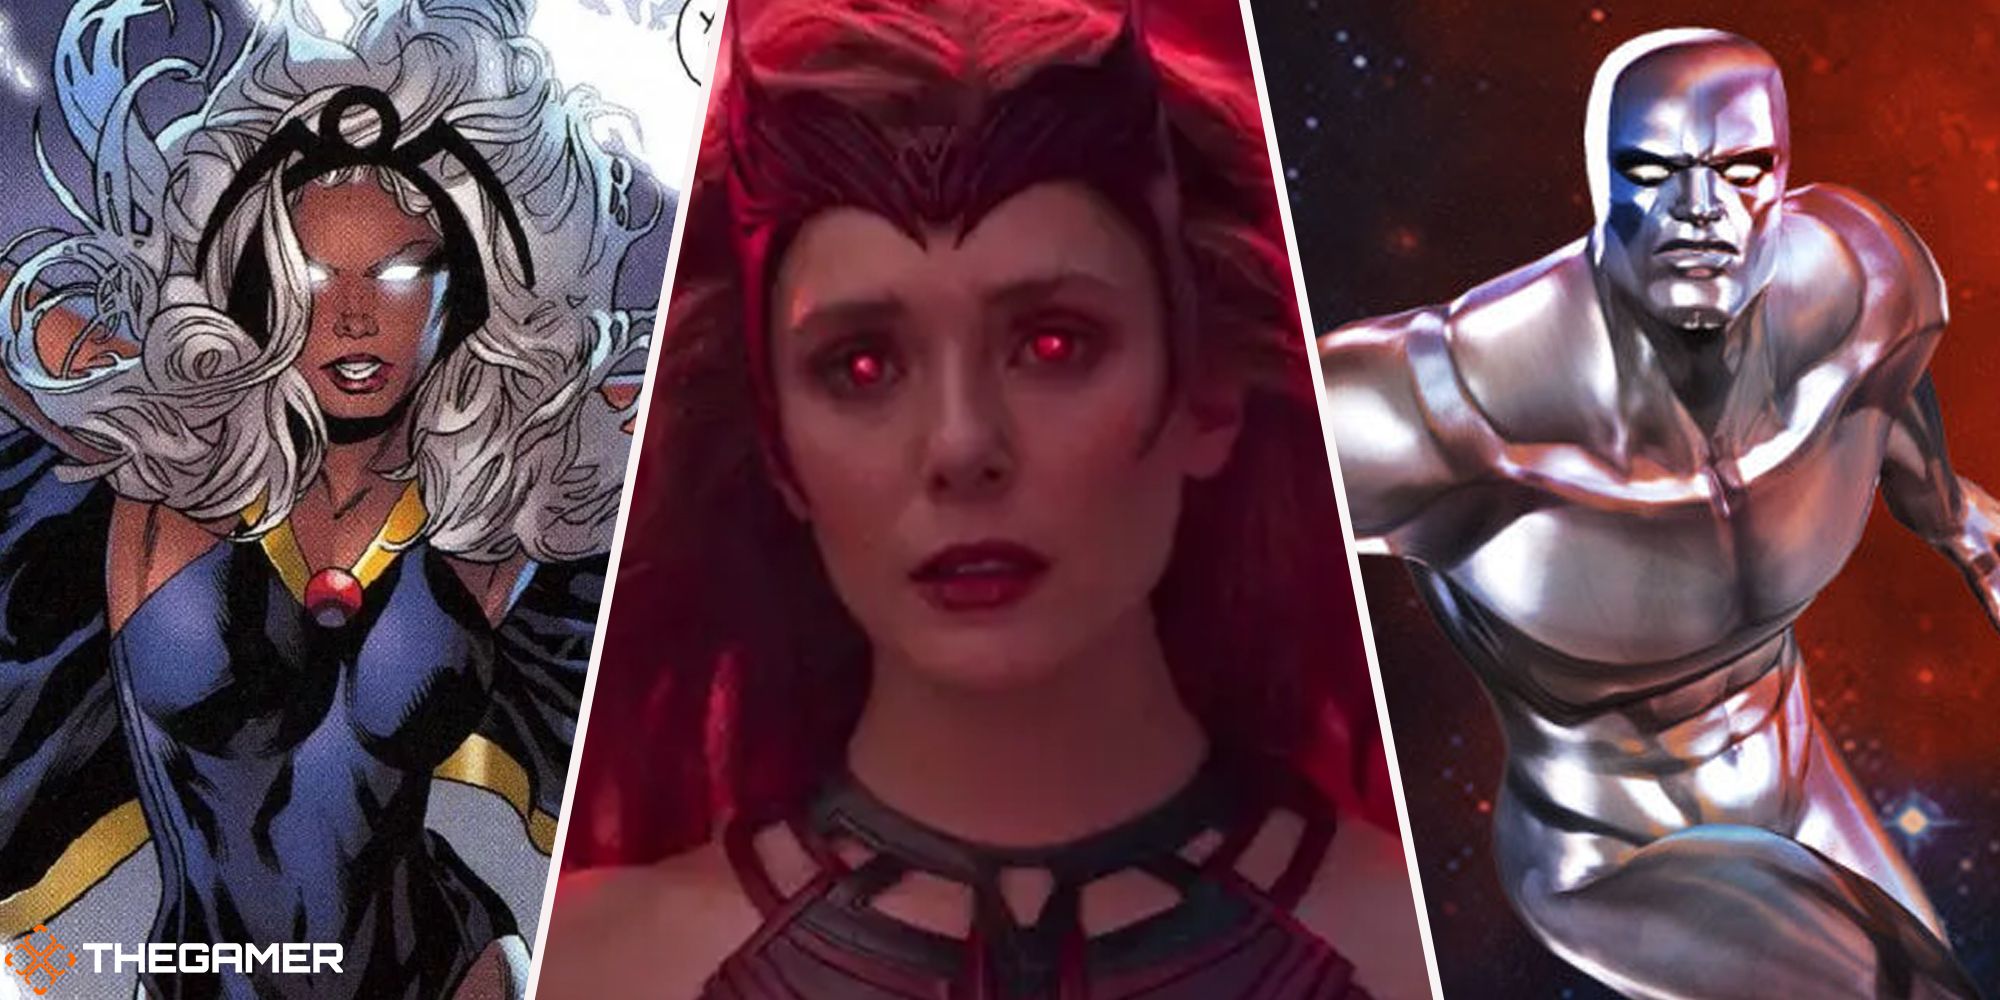 Marvel Characters - X-Men's Storm (left), Fantastic Four's Silver Surfer (right), Avenger's Scarlet Witch (middle)